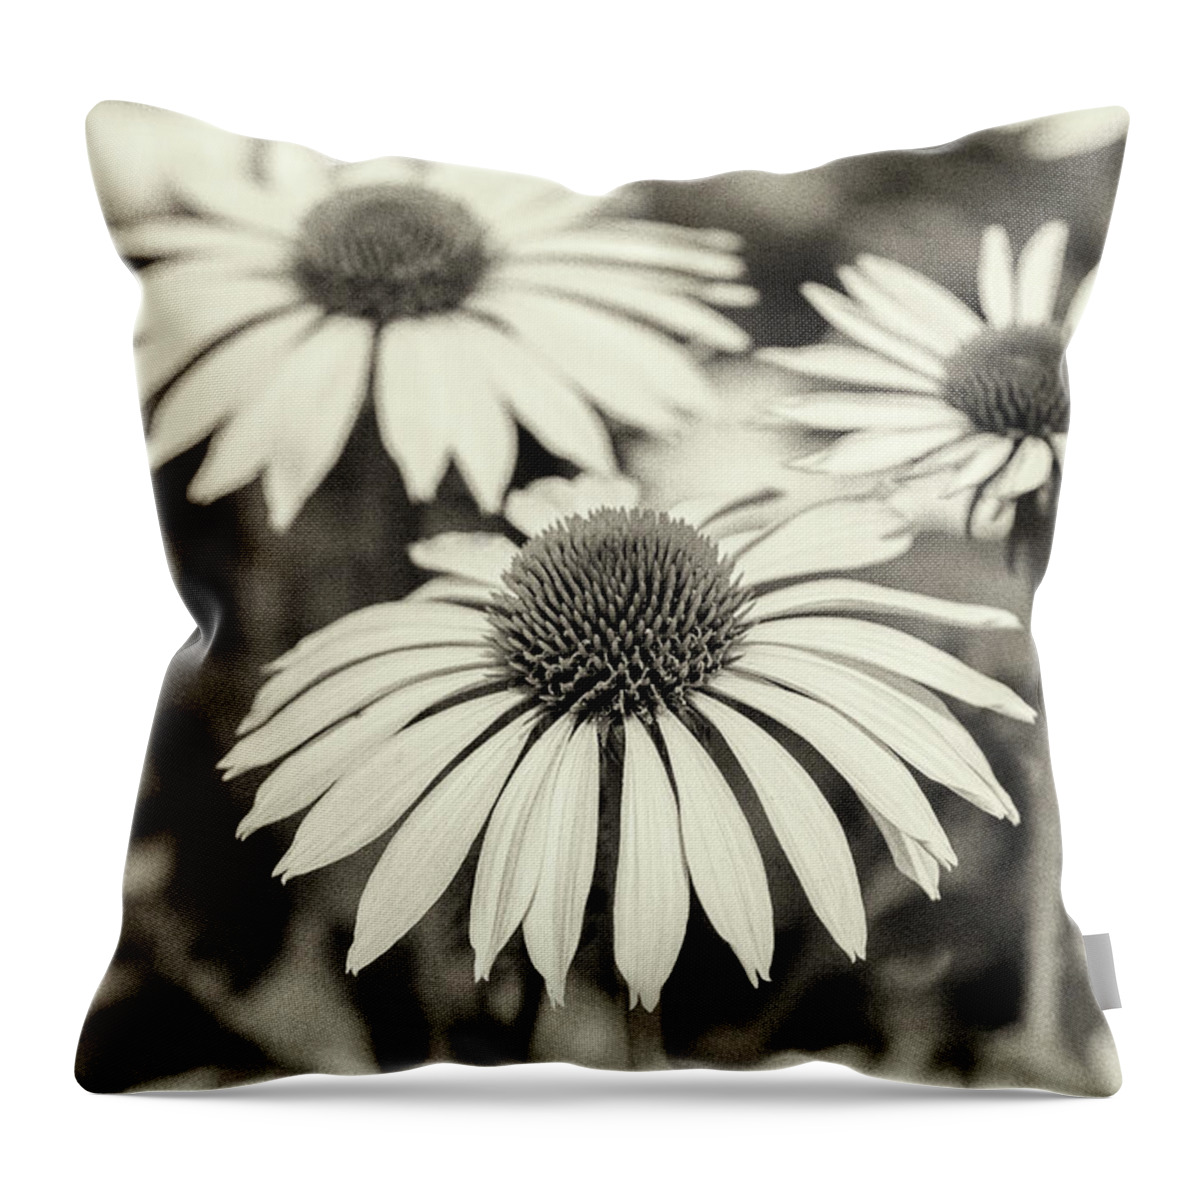 Black And White Flowers Throw Pillow featuring the photograph Echinacea Black And White by Tanya C Smith